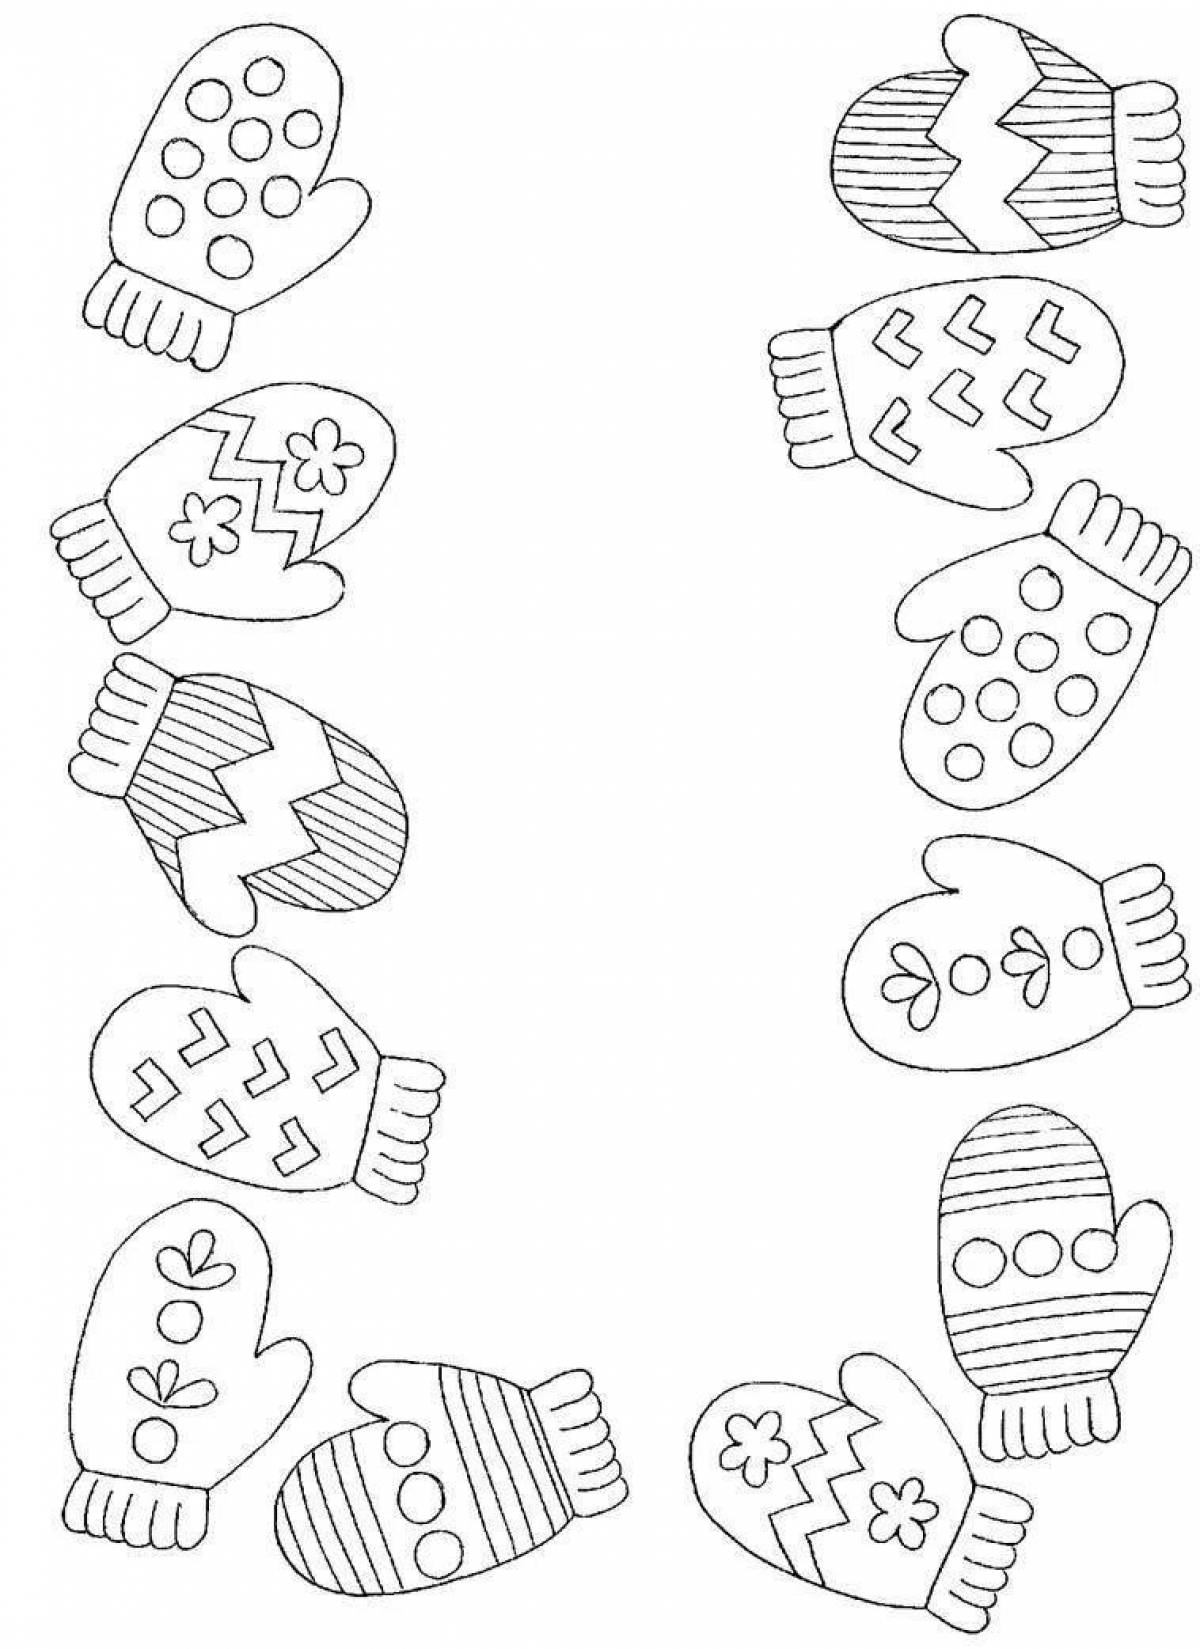 Blissful couple coloring pages